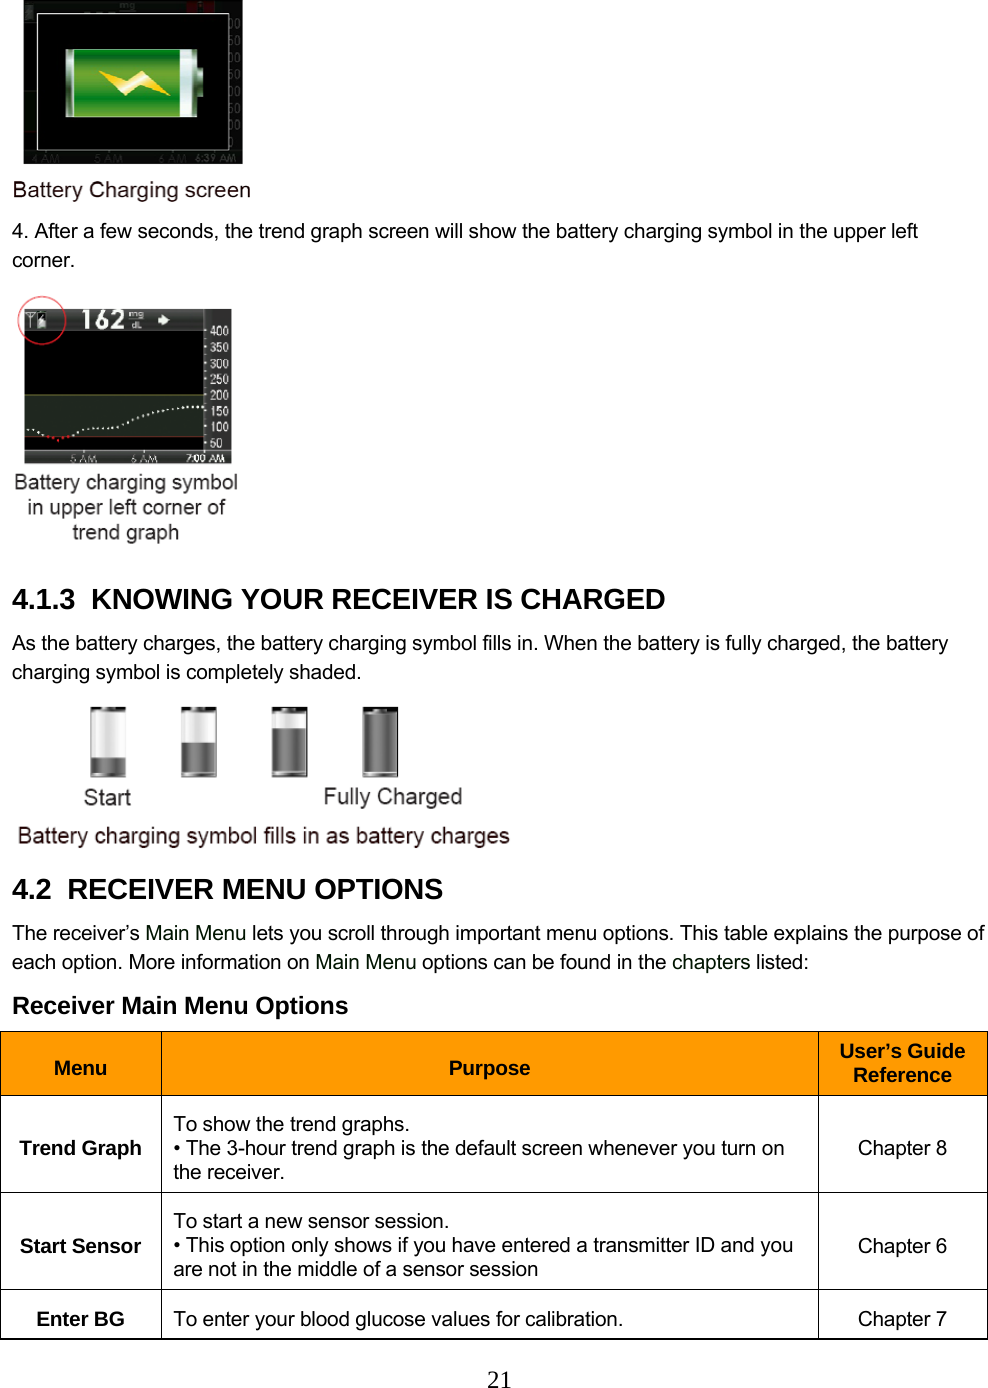 21   4. After a few seconds, the trend graph screen will show the battery charging symbol in the upper left corner.  4.1.3  KNOWING YOUR RECEIVER IS CHARGED As the battery charges, the battery charging symbol fills in. When the battery is fully charged, the battery charging symbol is completely shaded.  4.2  RECEIVER MENU OPTIONS The receiver’s Main Menu lets you scroll through important menu options. This table explains the purpose of each option. More information on Main Menu options can be found in the chapters listed: Receiver Main Menu Options Menu Purpose User’s Guide Reference Trend Graph To show the trend graphs. • The 3-hour trend graph is the default screen whenever you turn on the receiver. Chapter 8 Start Sensor To start a new sensor session. • This option only shows if you have entered a transmitter ID and you are not in the middle of a sensor session Chapter 6 Enter BG To enter your blood glucose values for calibration. Chapter 7 